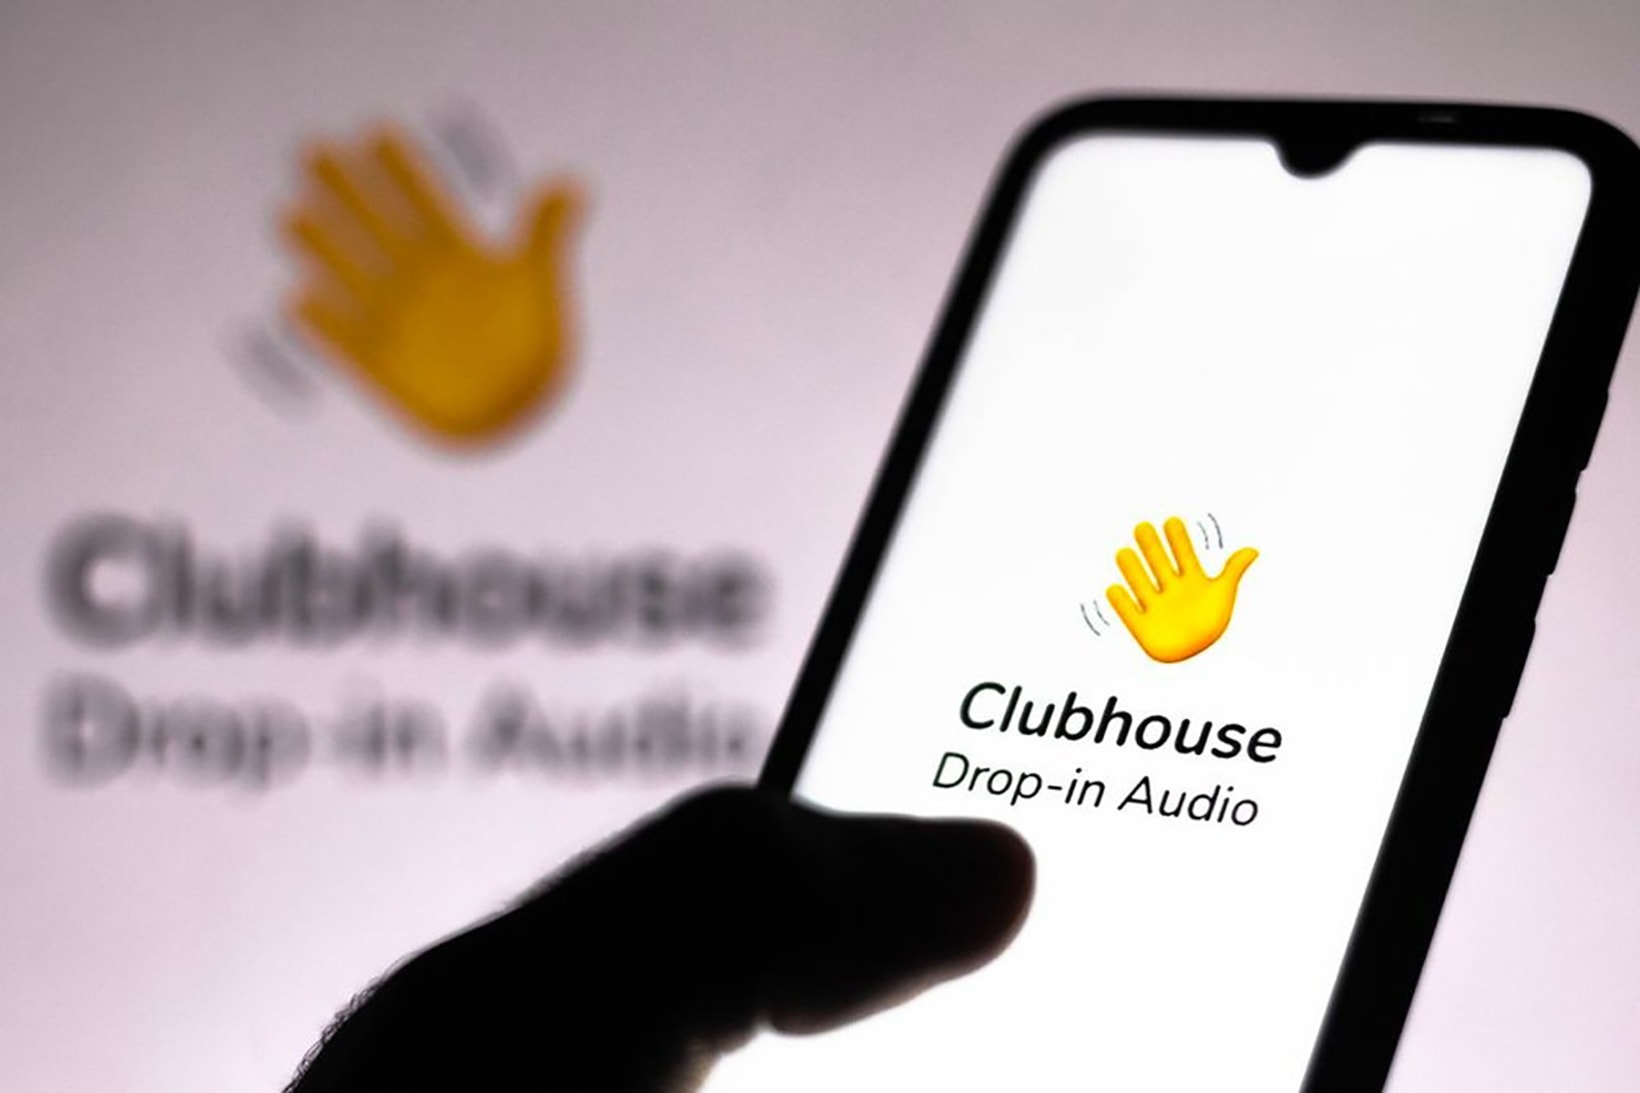 clubhouse users account data information leak online app